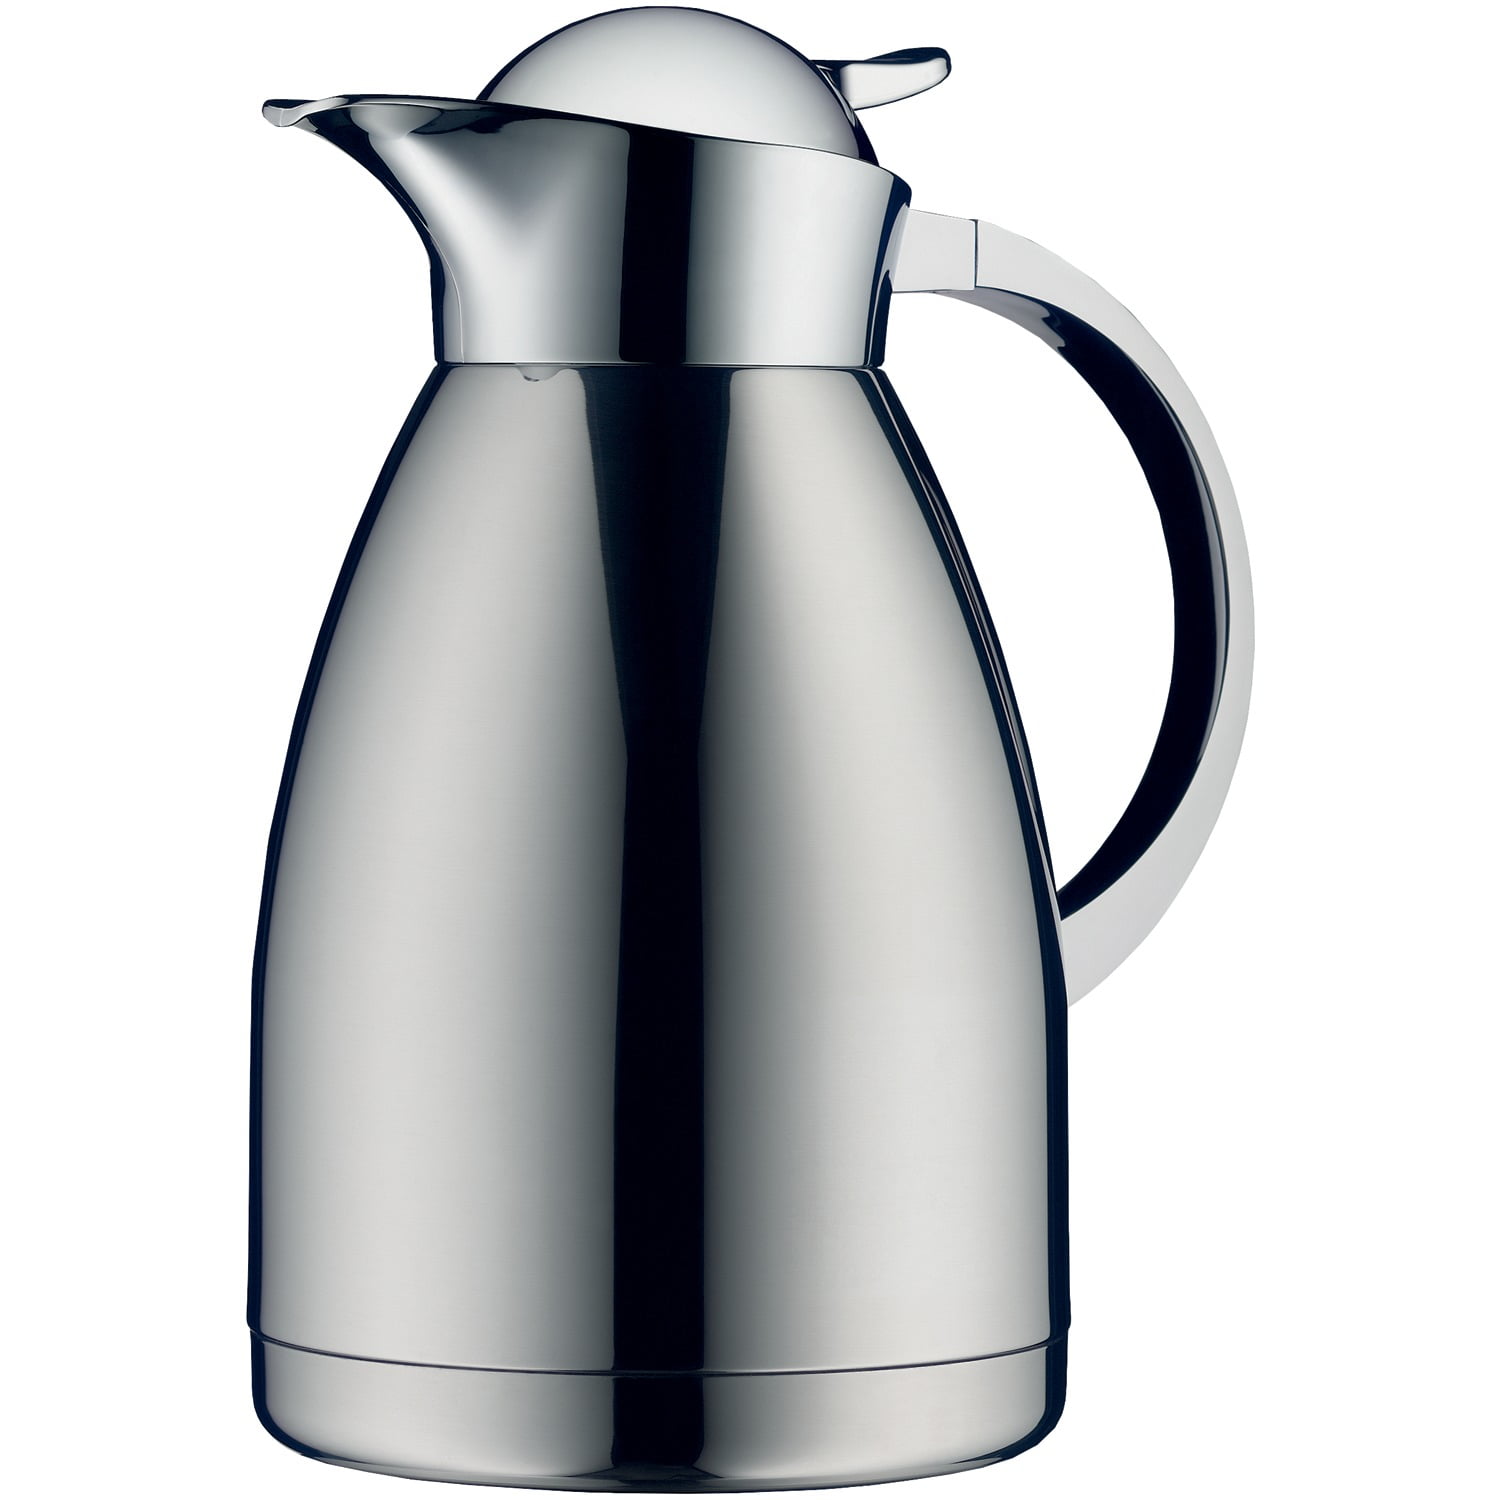 1 Litre ALFI Insulated jug Powder Green Stainless Steel